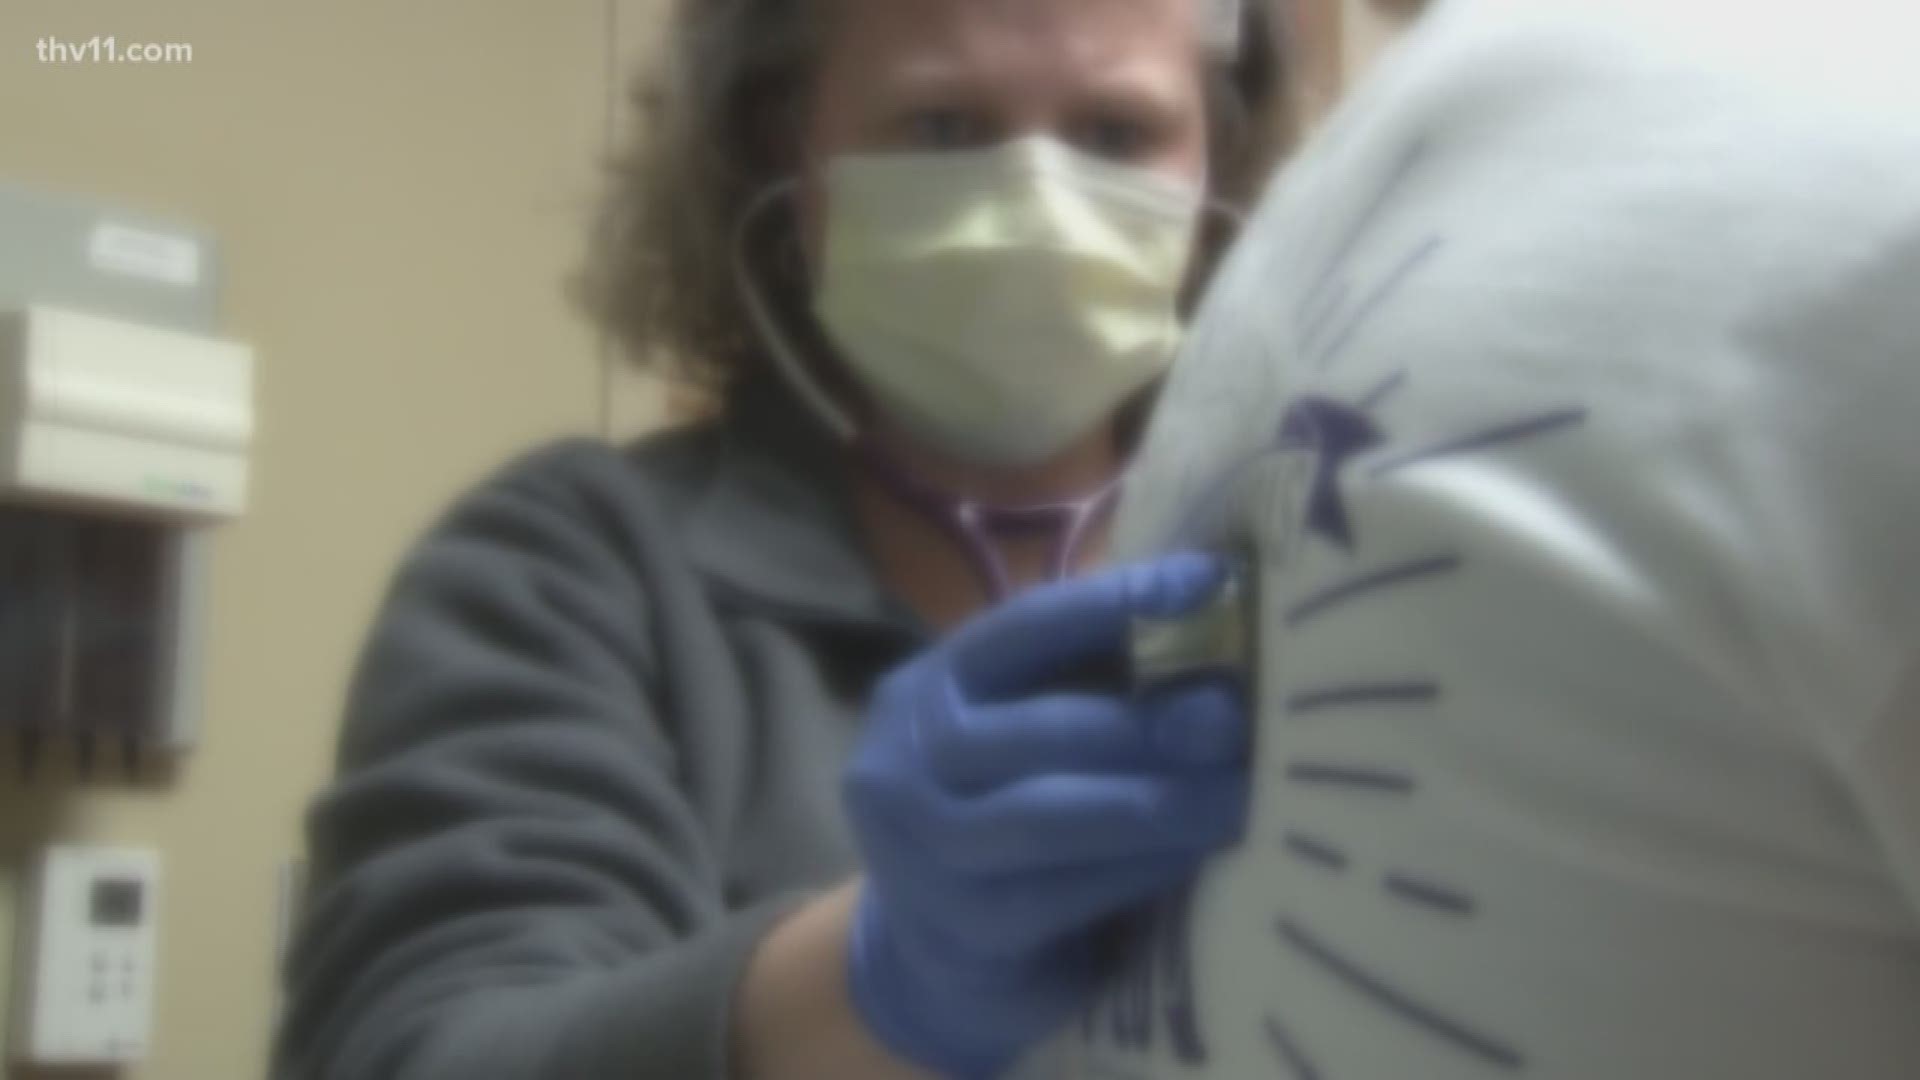 The Department of Health sees an increase in the number and severity of flu cases statewide.